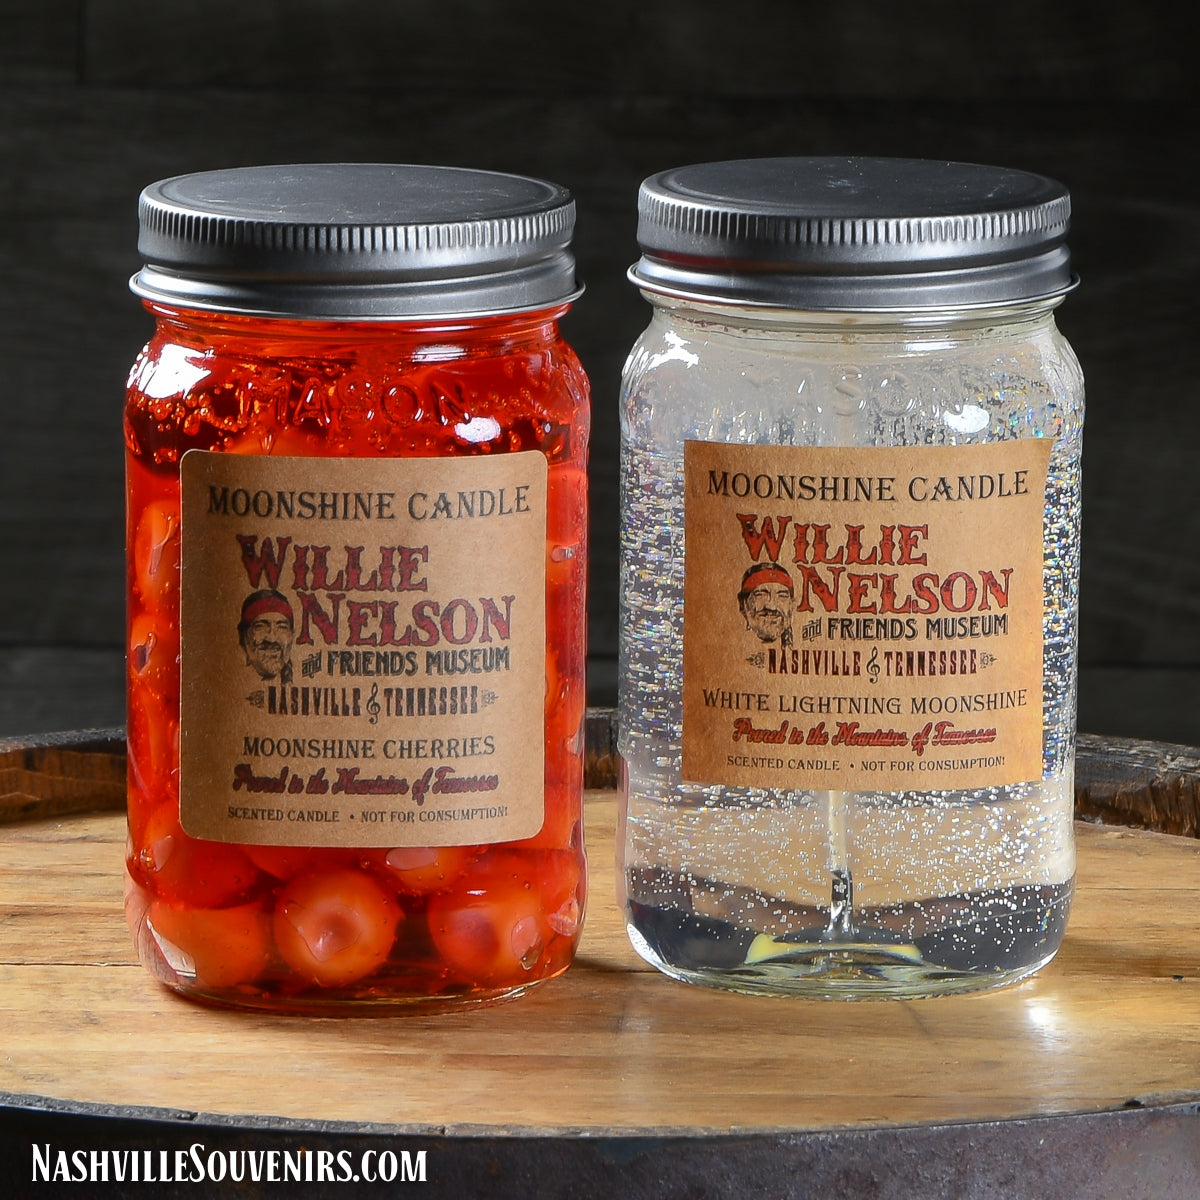 Willie Nelson "Moonshine Cherries and White Lightning Candles